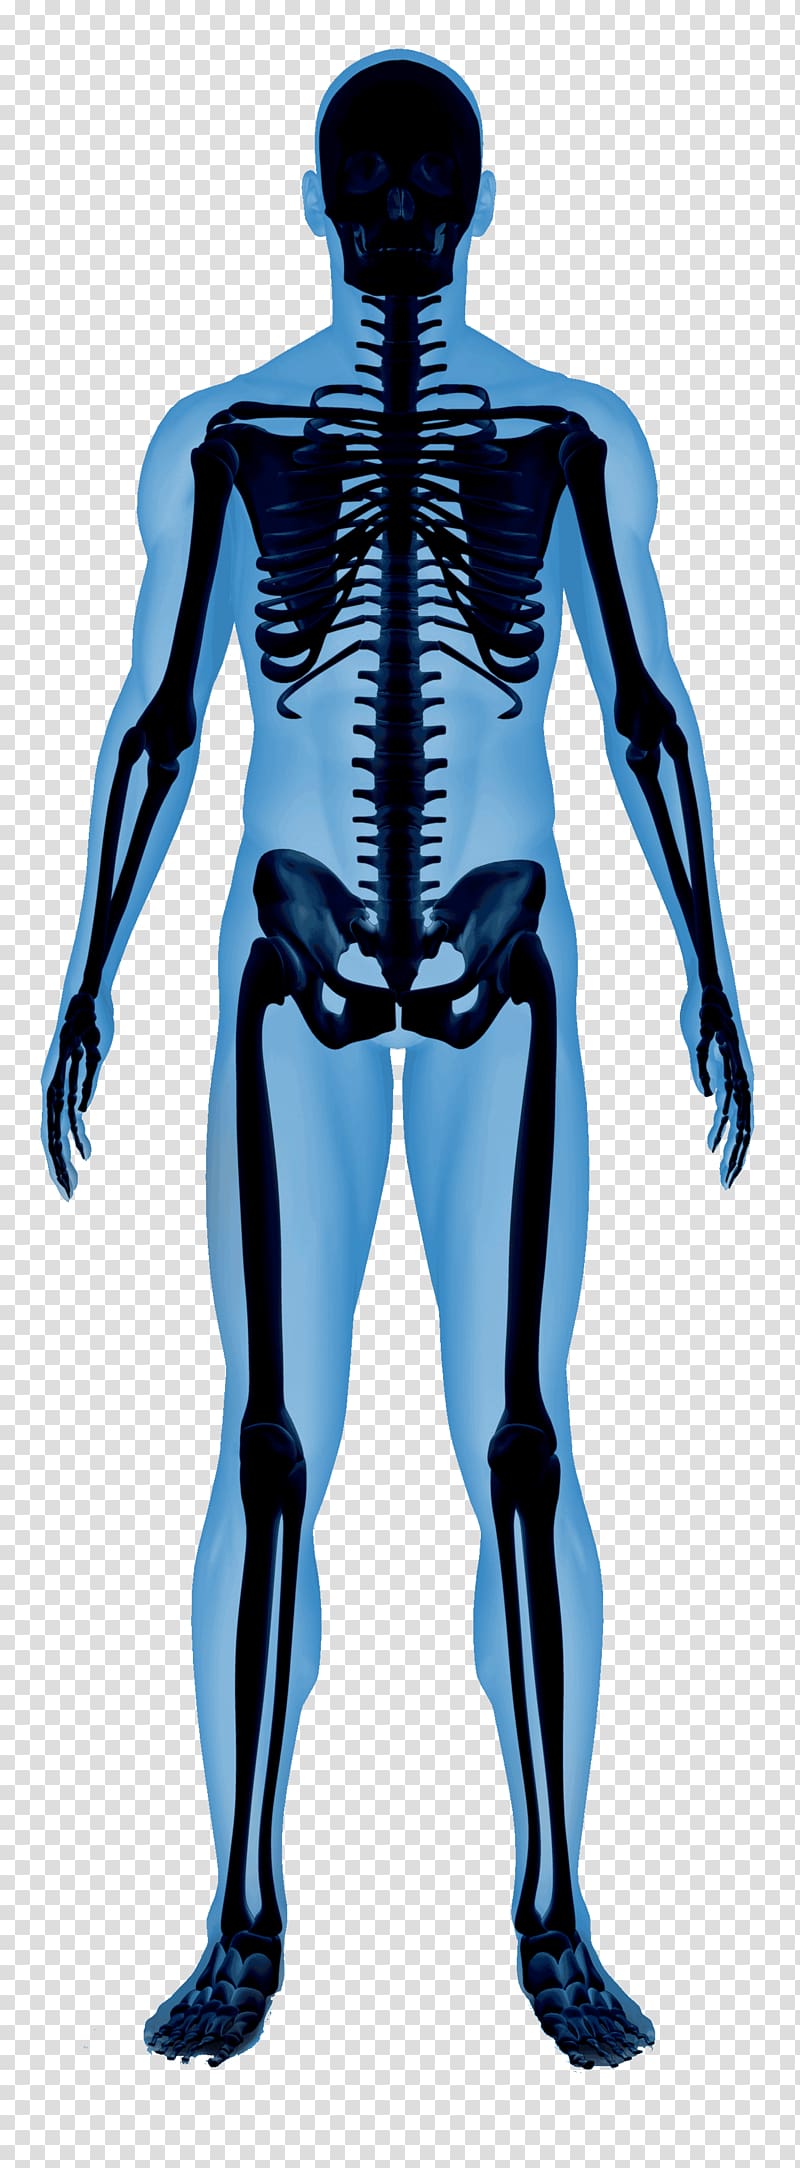 Human skeleton Essential of Human Anatomy and Physiology Human body, Skeleton transparent background PNG clipart